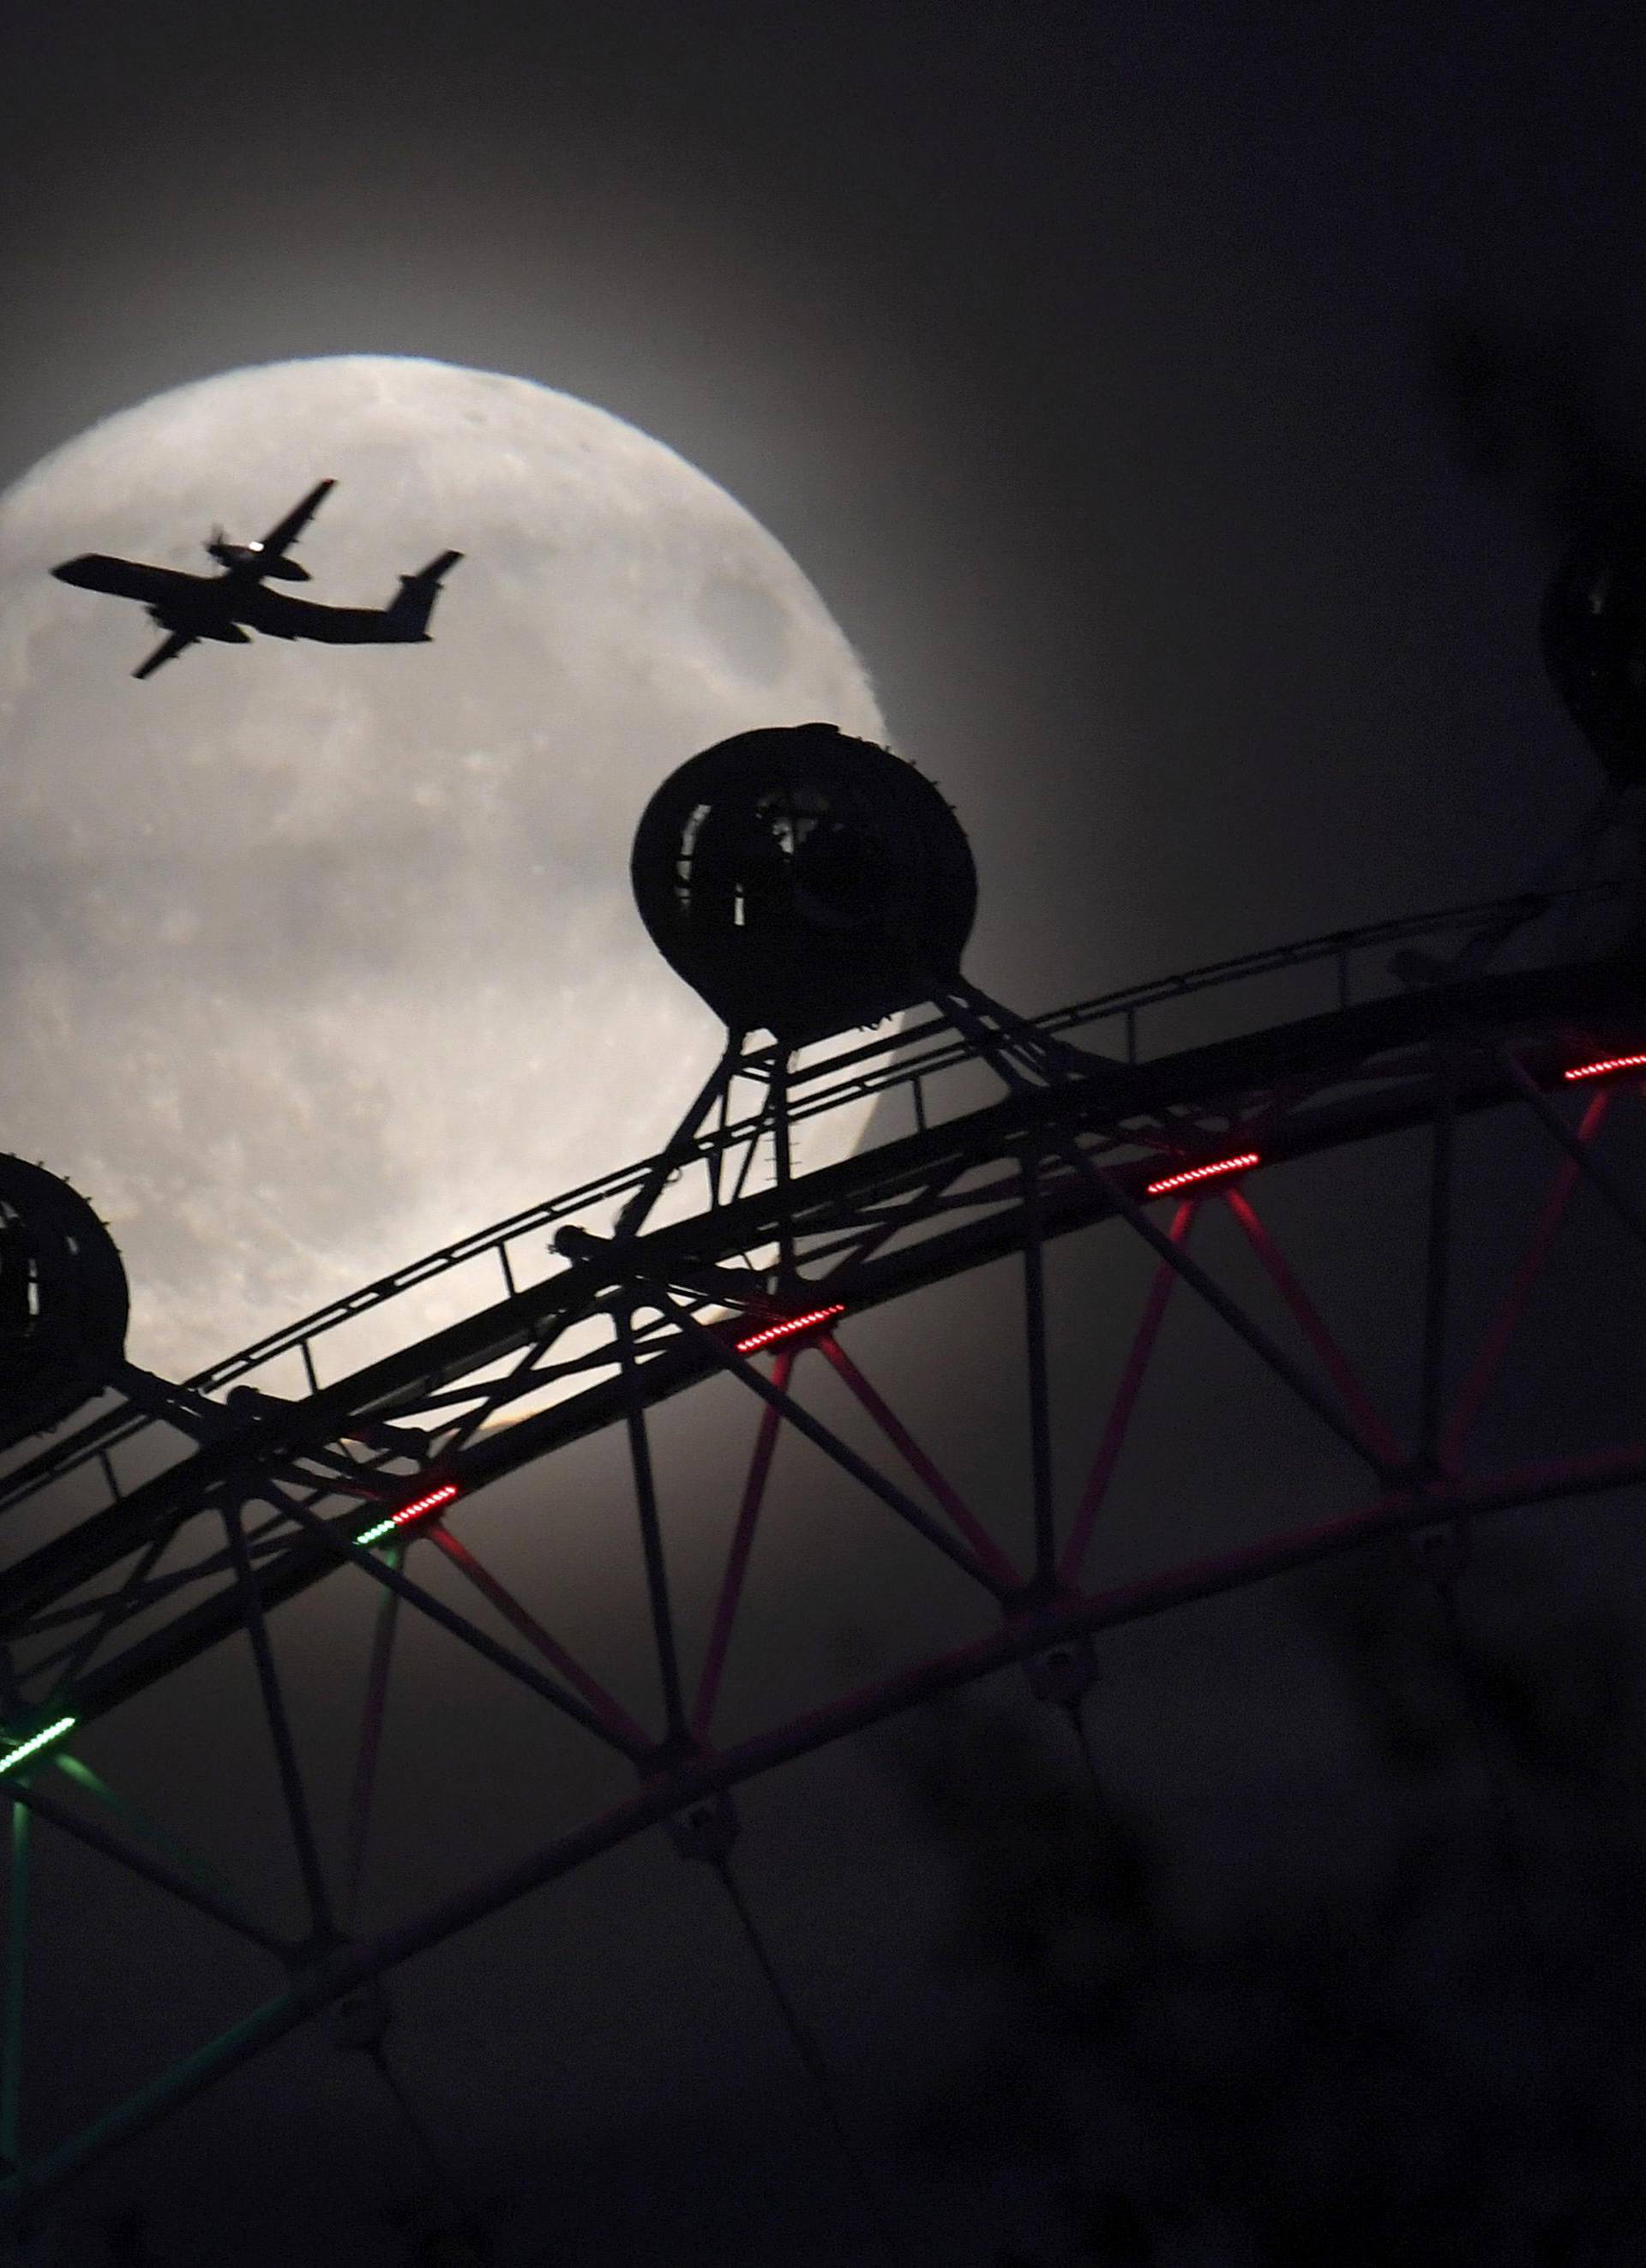 An aeroplane flies past the London Eye wheel, and moon, a day before the "supermoon" spectacle in London